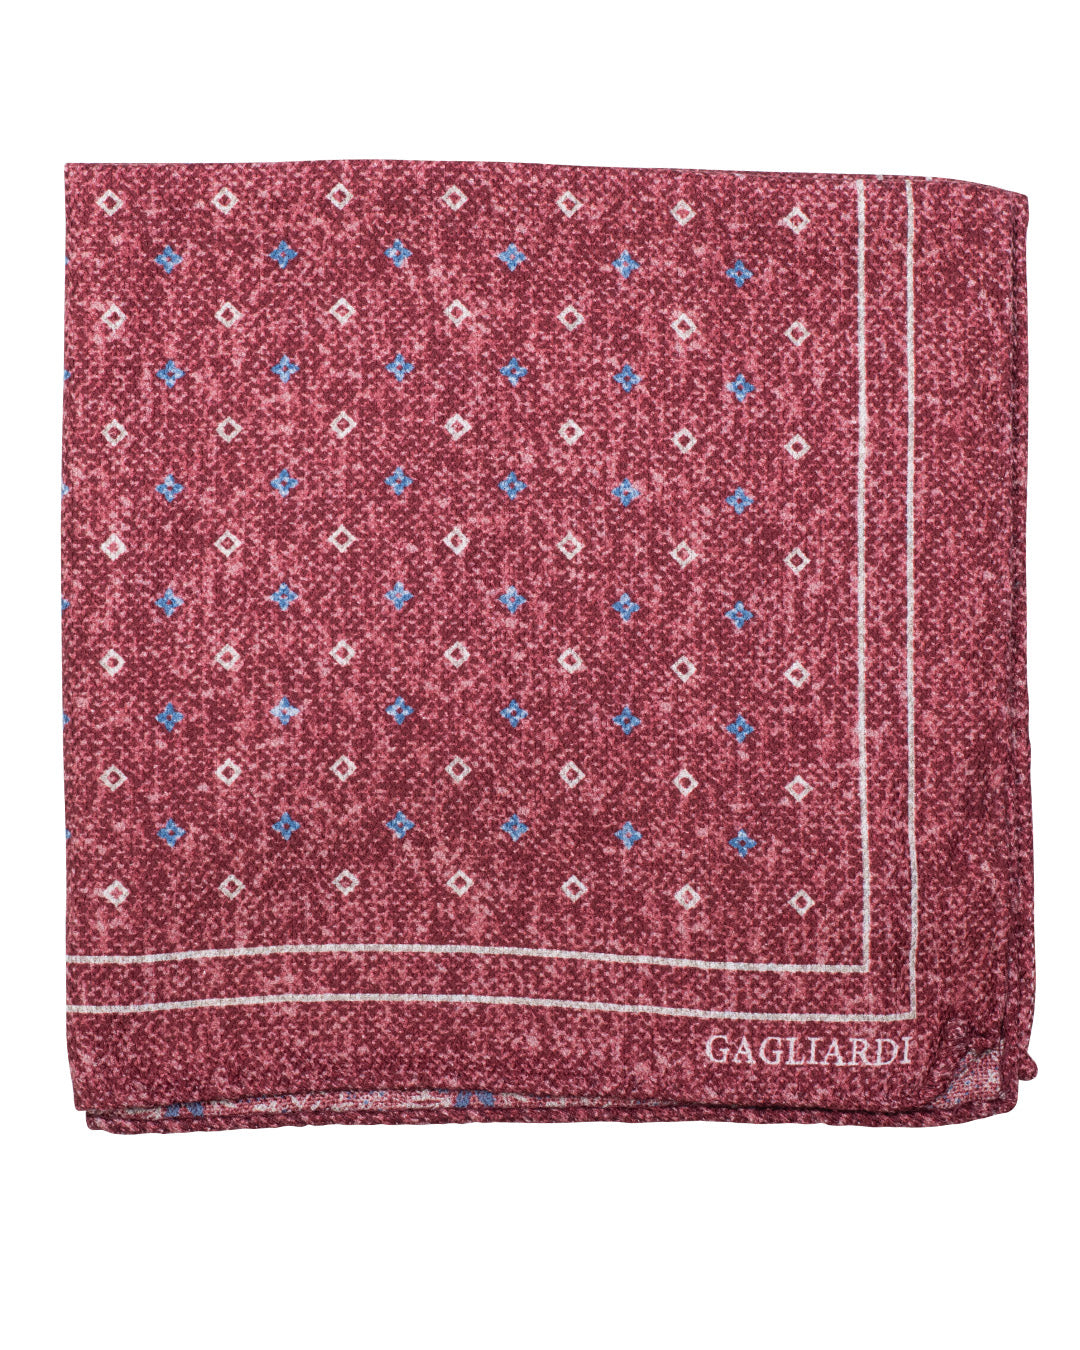 Red Diamonds & Floral Print Italian Silk Double Sided Pocket Square